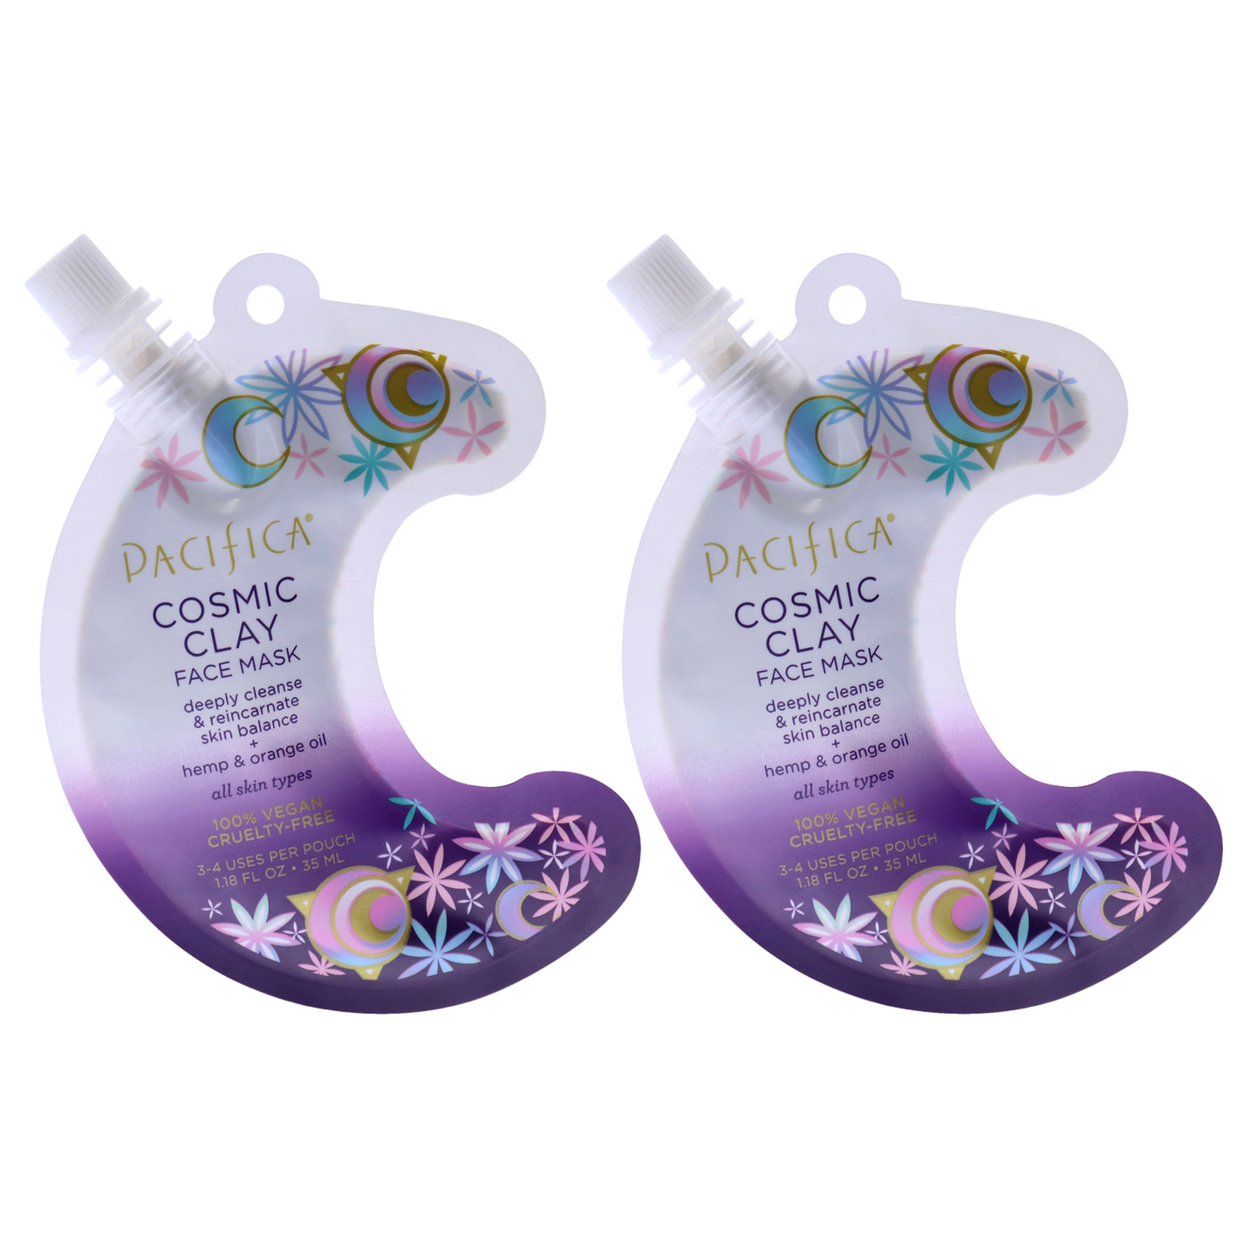 Pacifica Cosmic Clay Face Mask - Pack Of 2 1.18 Oz